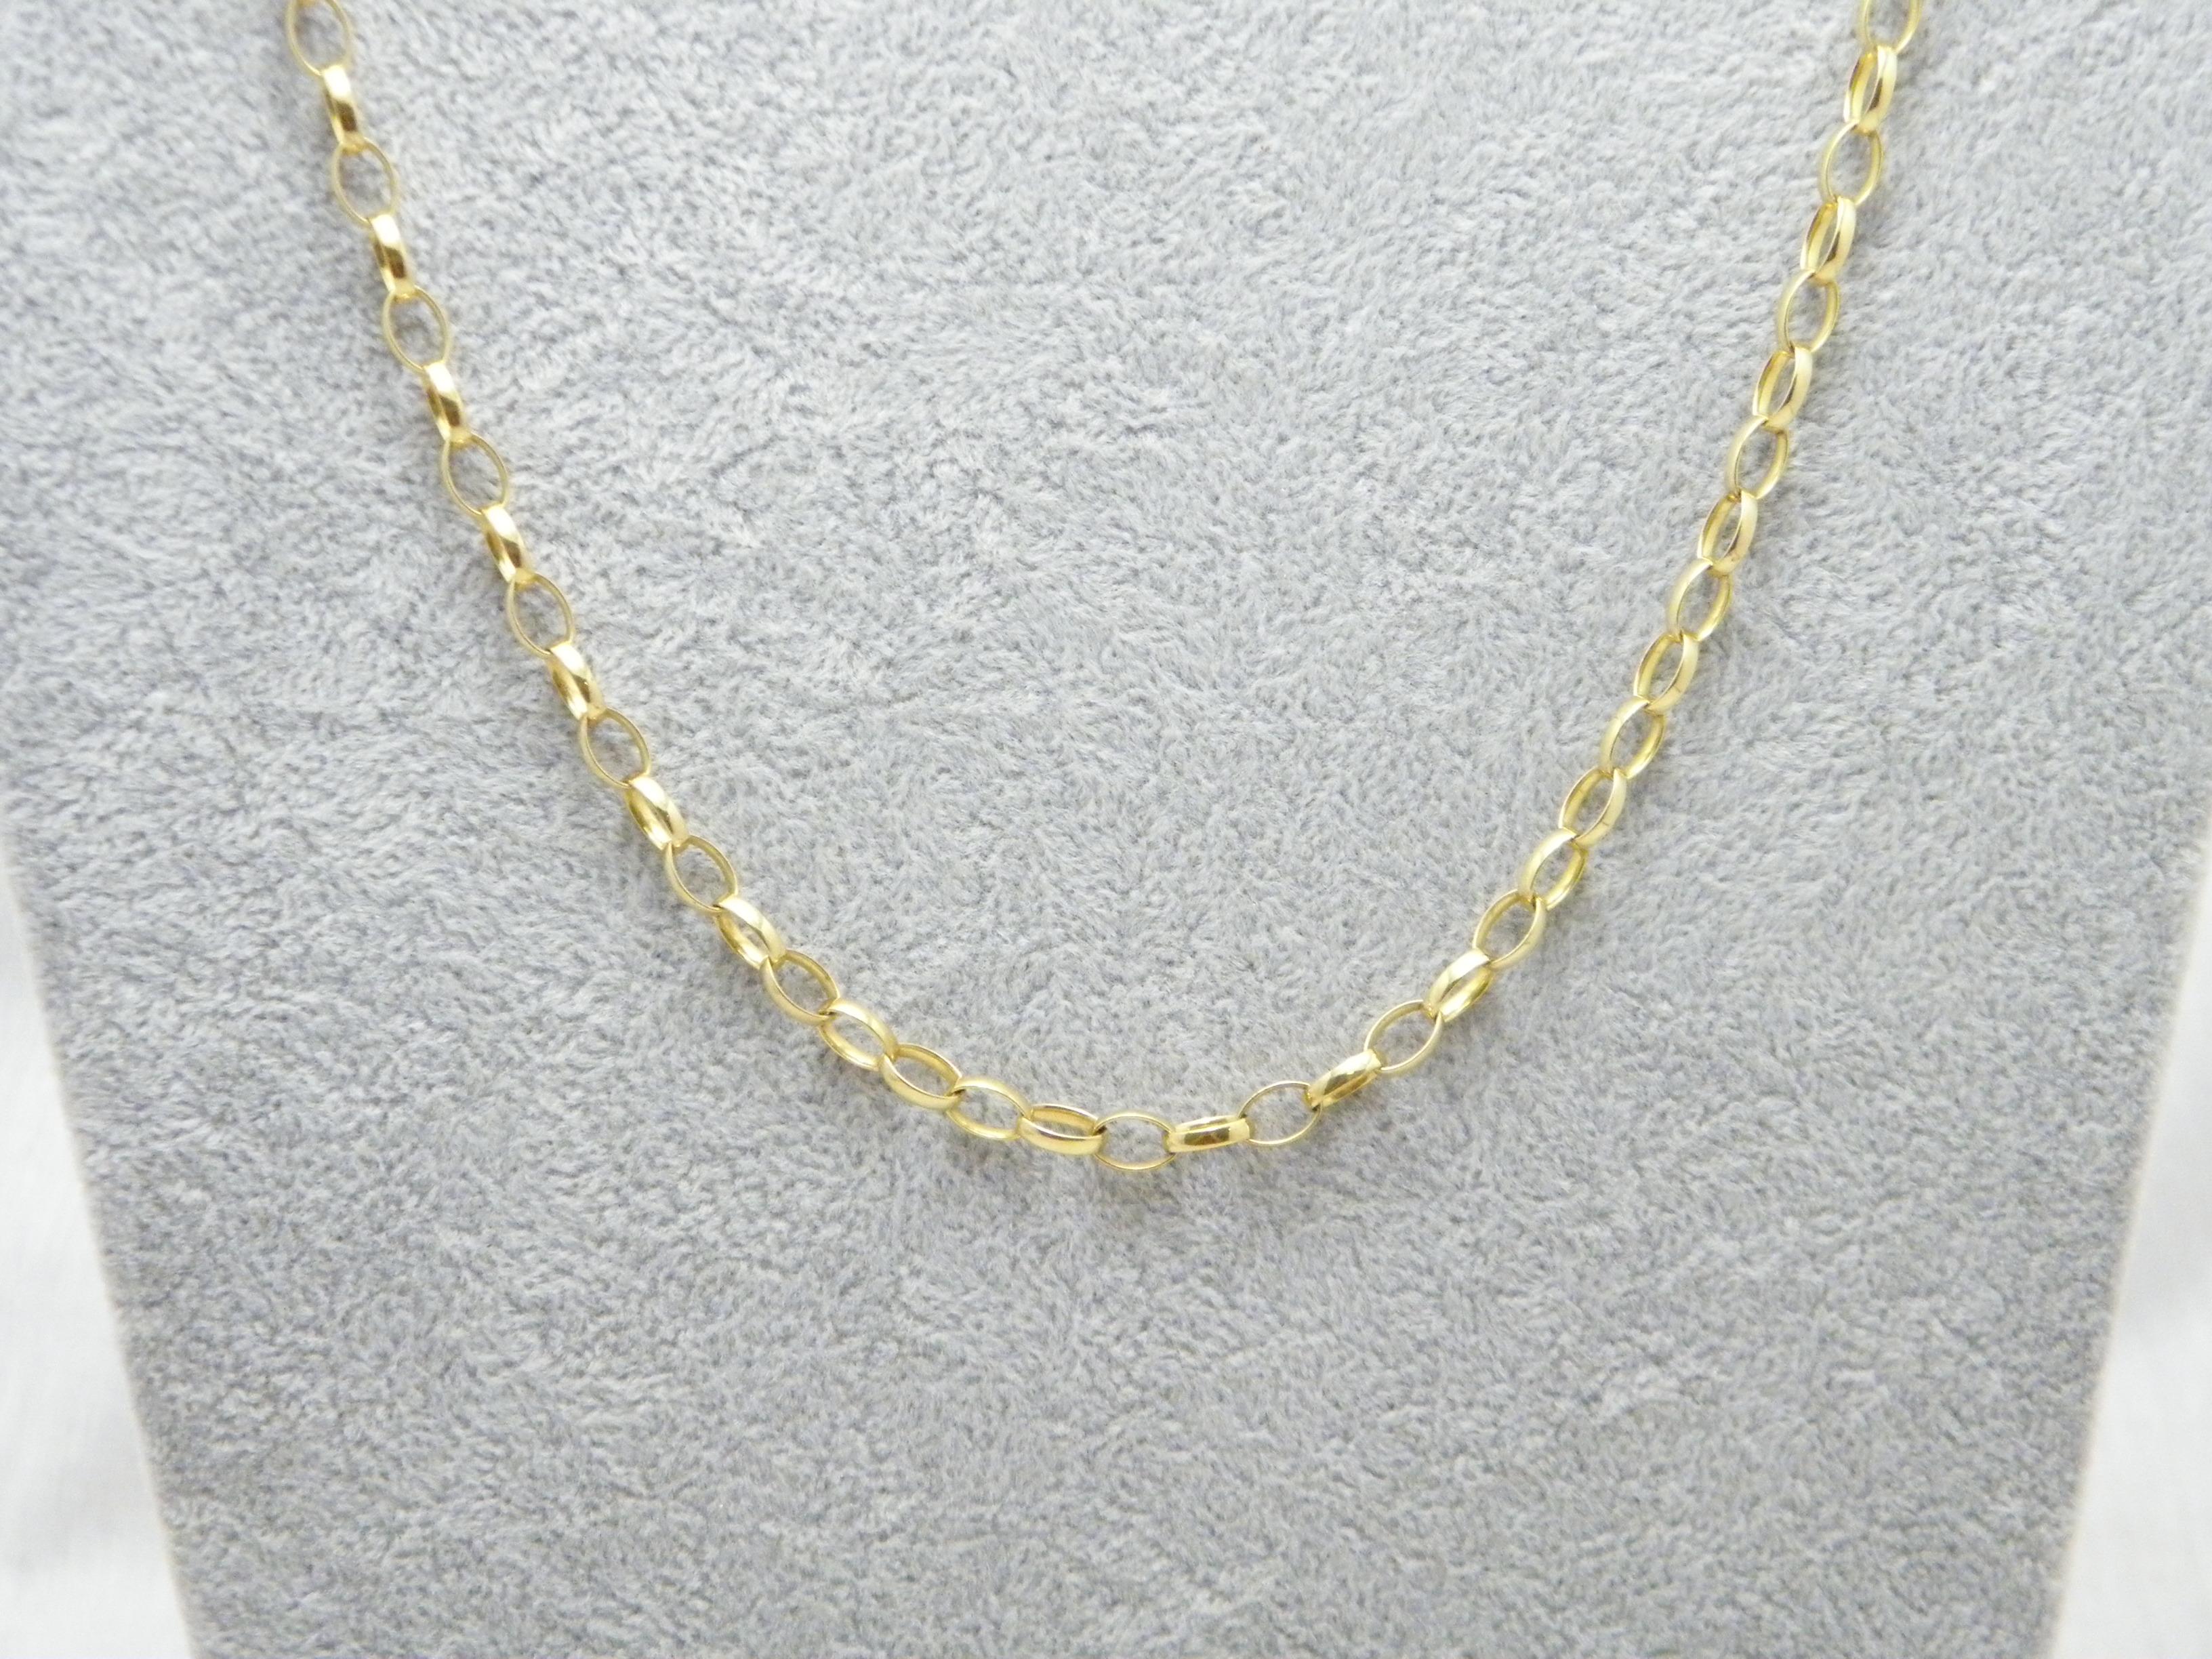 If you have landed on this page then you have an eye for beauty.

On offer is this gorgeous

9CT GOLD 20 INCH HEAVY OVAL ROLO BELCHER NECKLACE

CHAIN DESCRIPTION
Style: Oval belcher chain, thick, long links of approx 6.5mm x 4.8mm
Length: 20